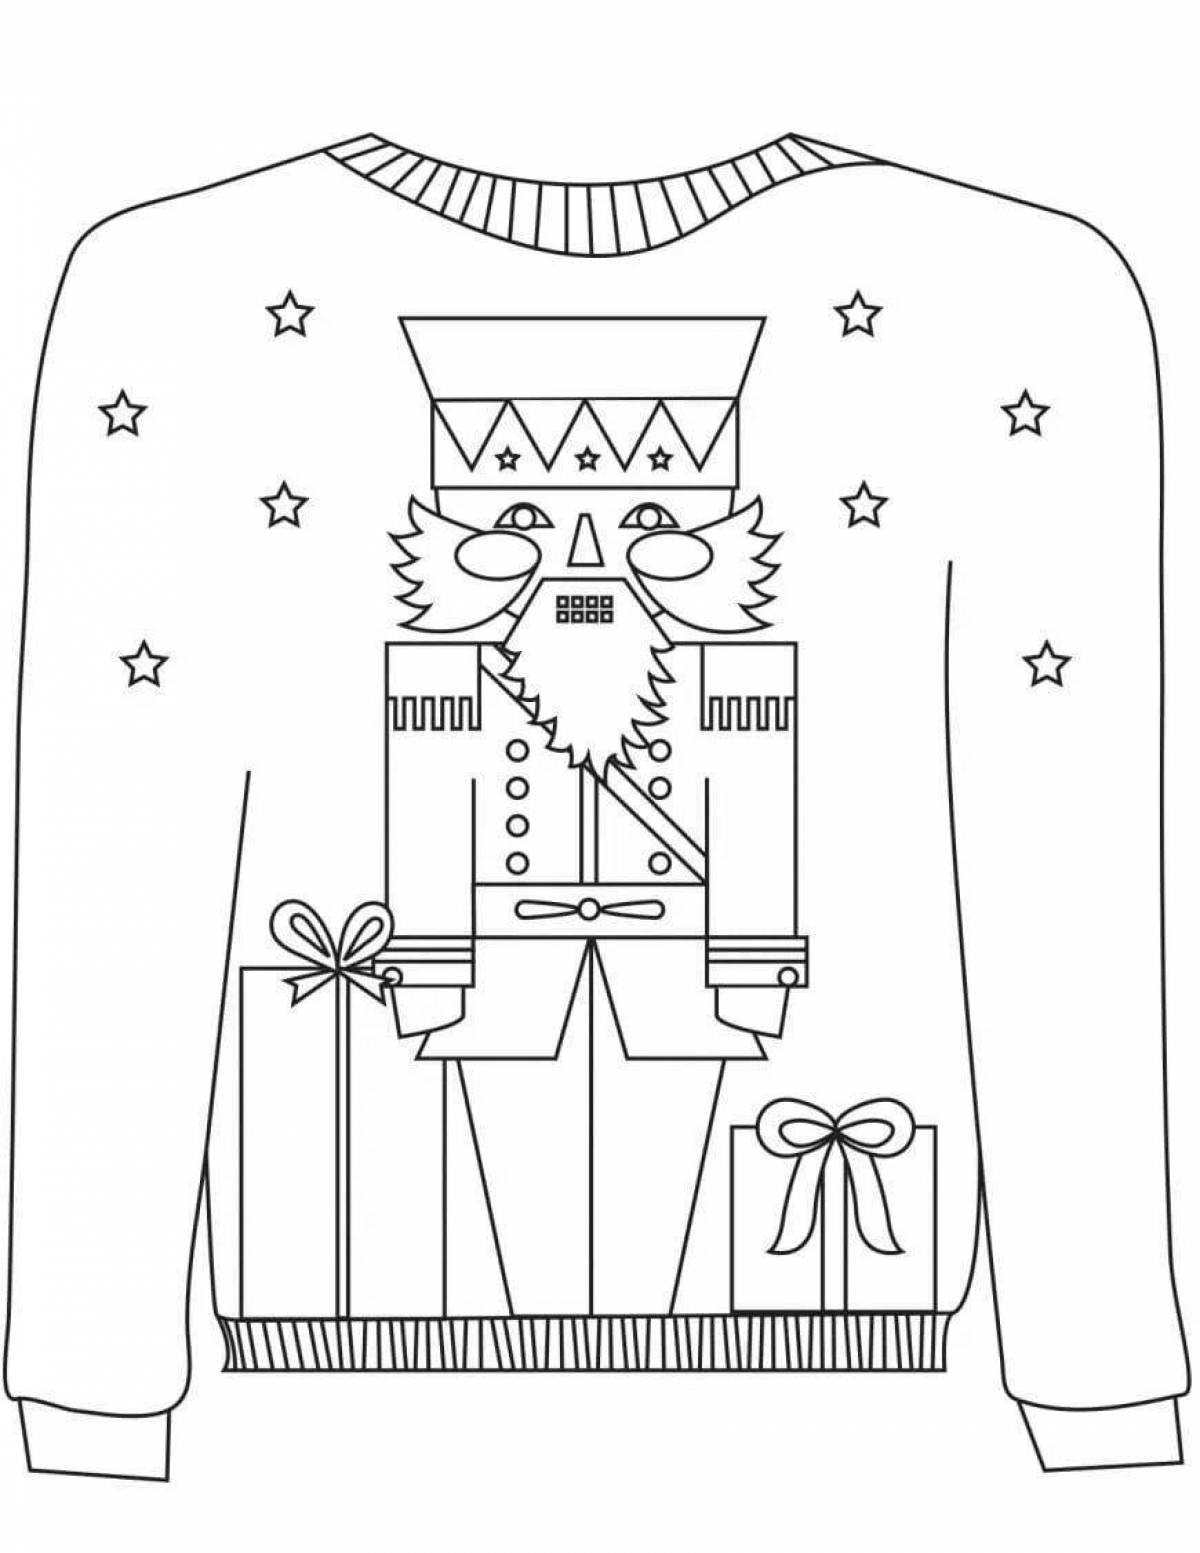 Gorgeous Christmas sweater coloring book